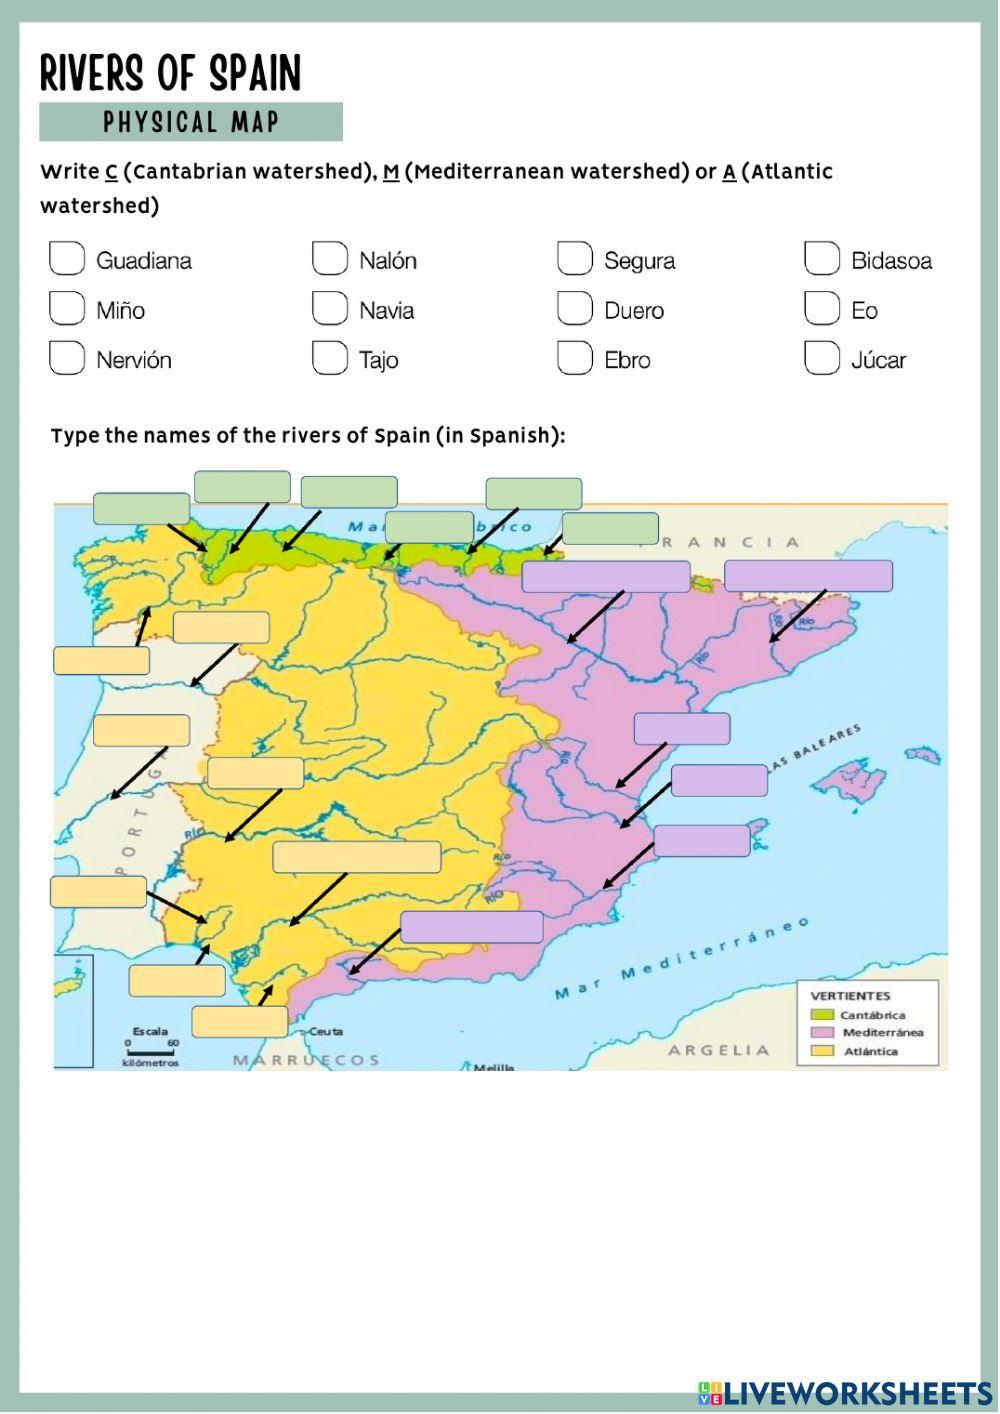 Geography of Spain and Europe